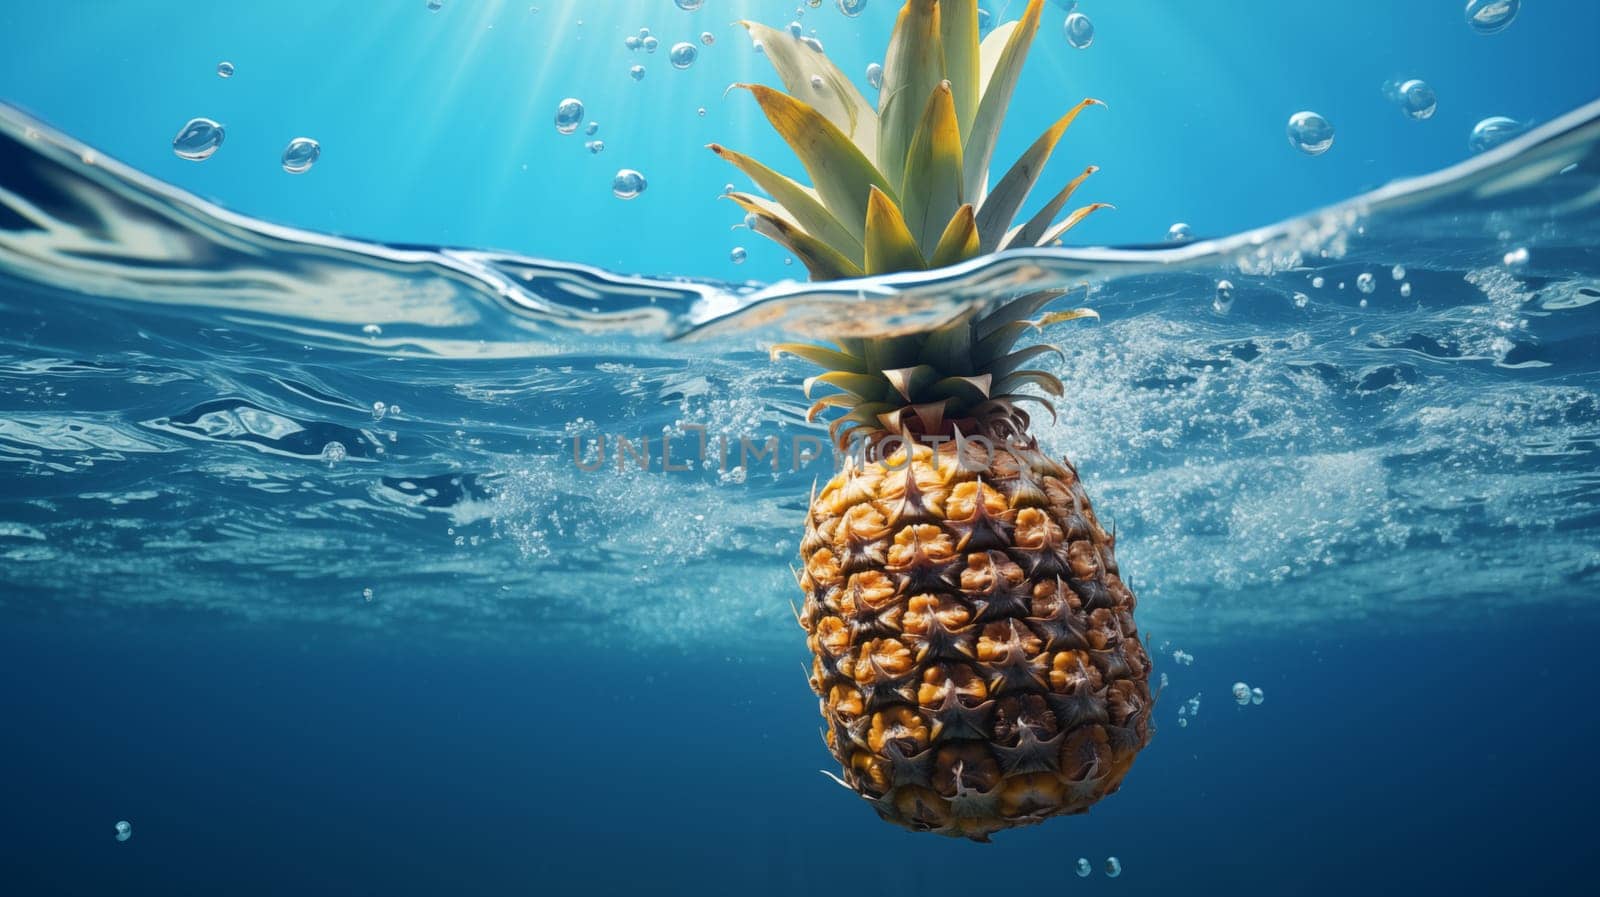 Fresh pineapple under blue water, with splashes and air bubbles by Zakharova